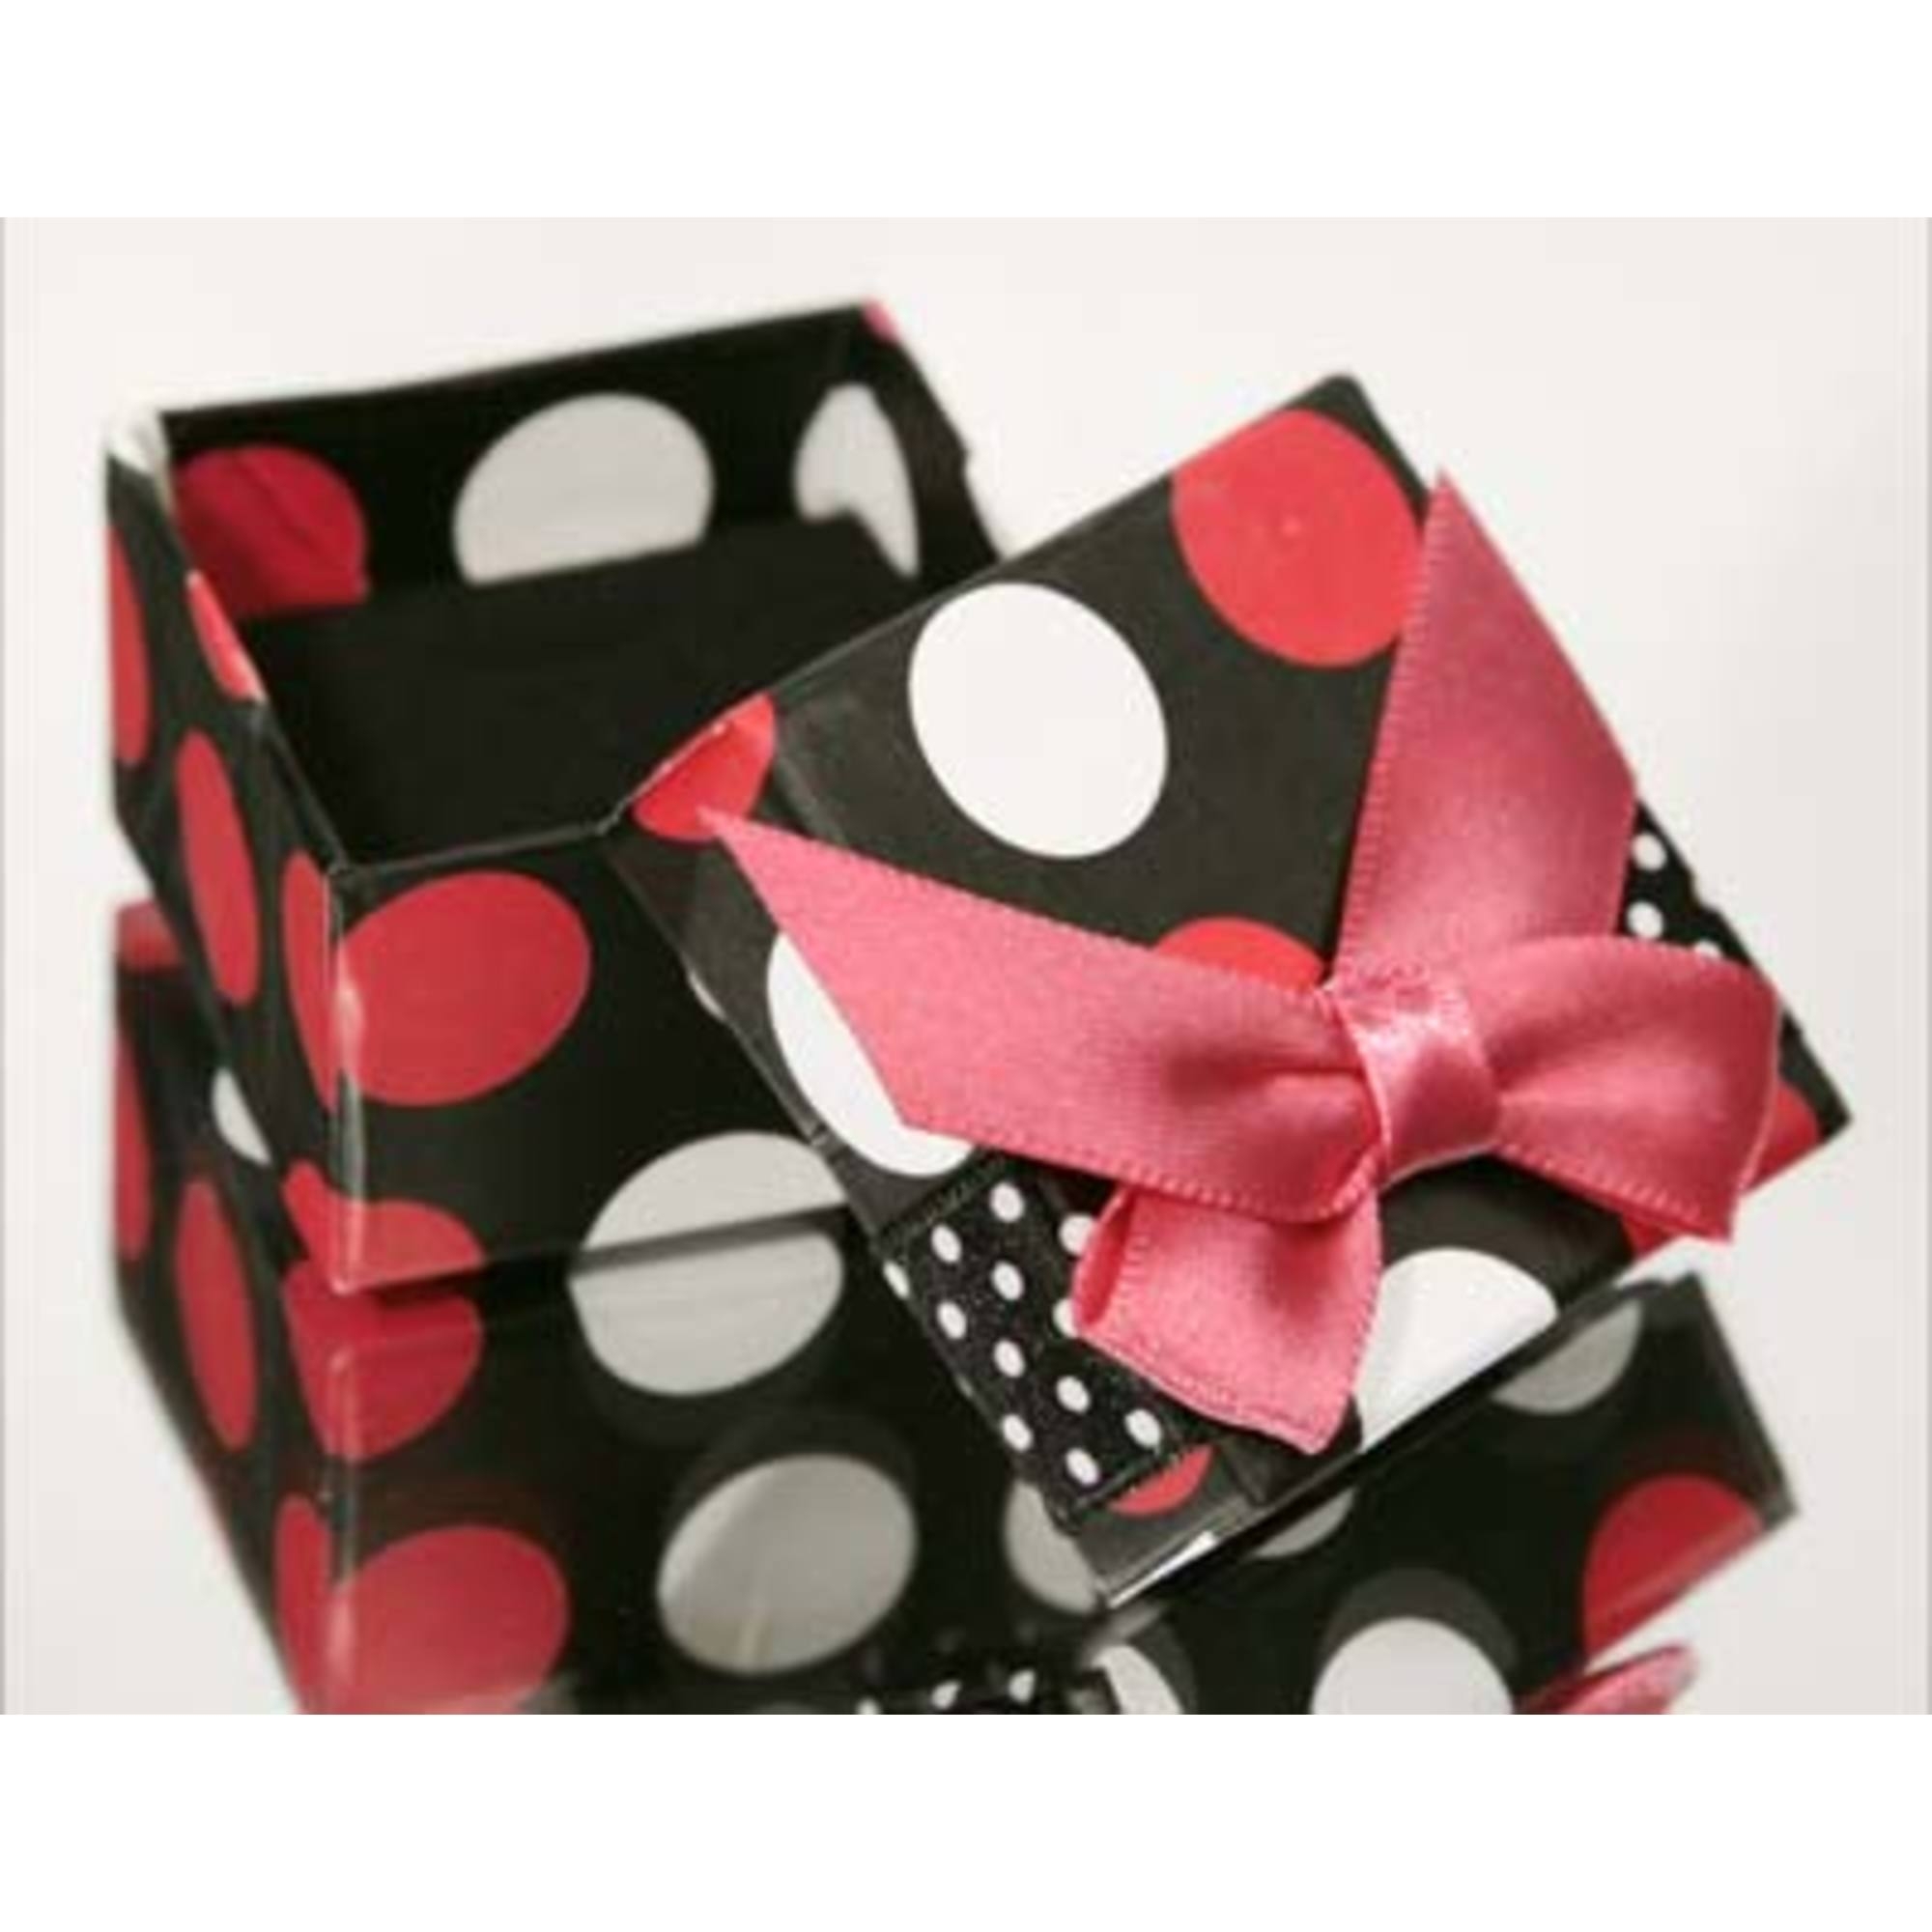 Jewellery Gift Box - Black, Red and White